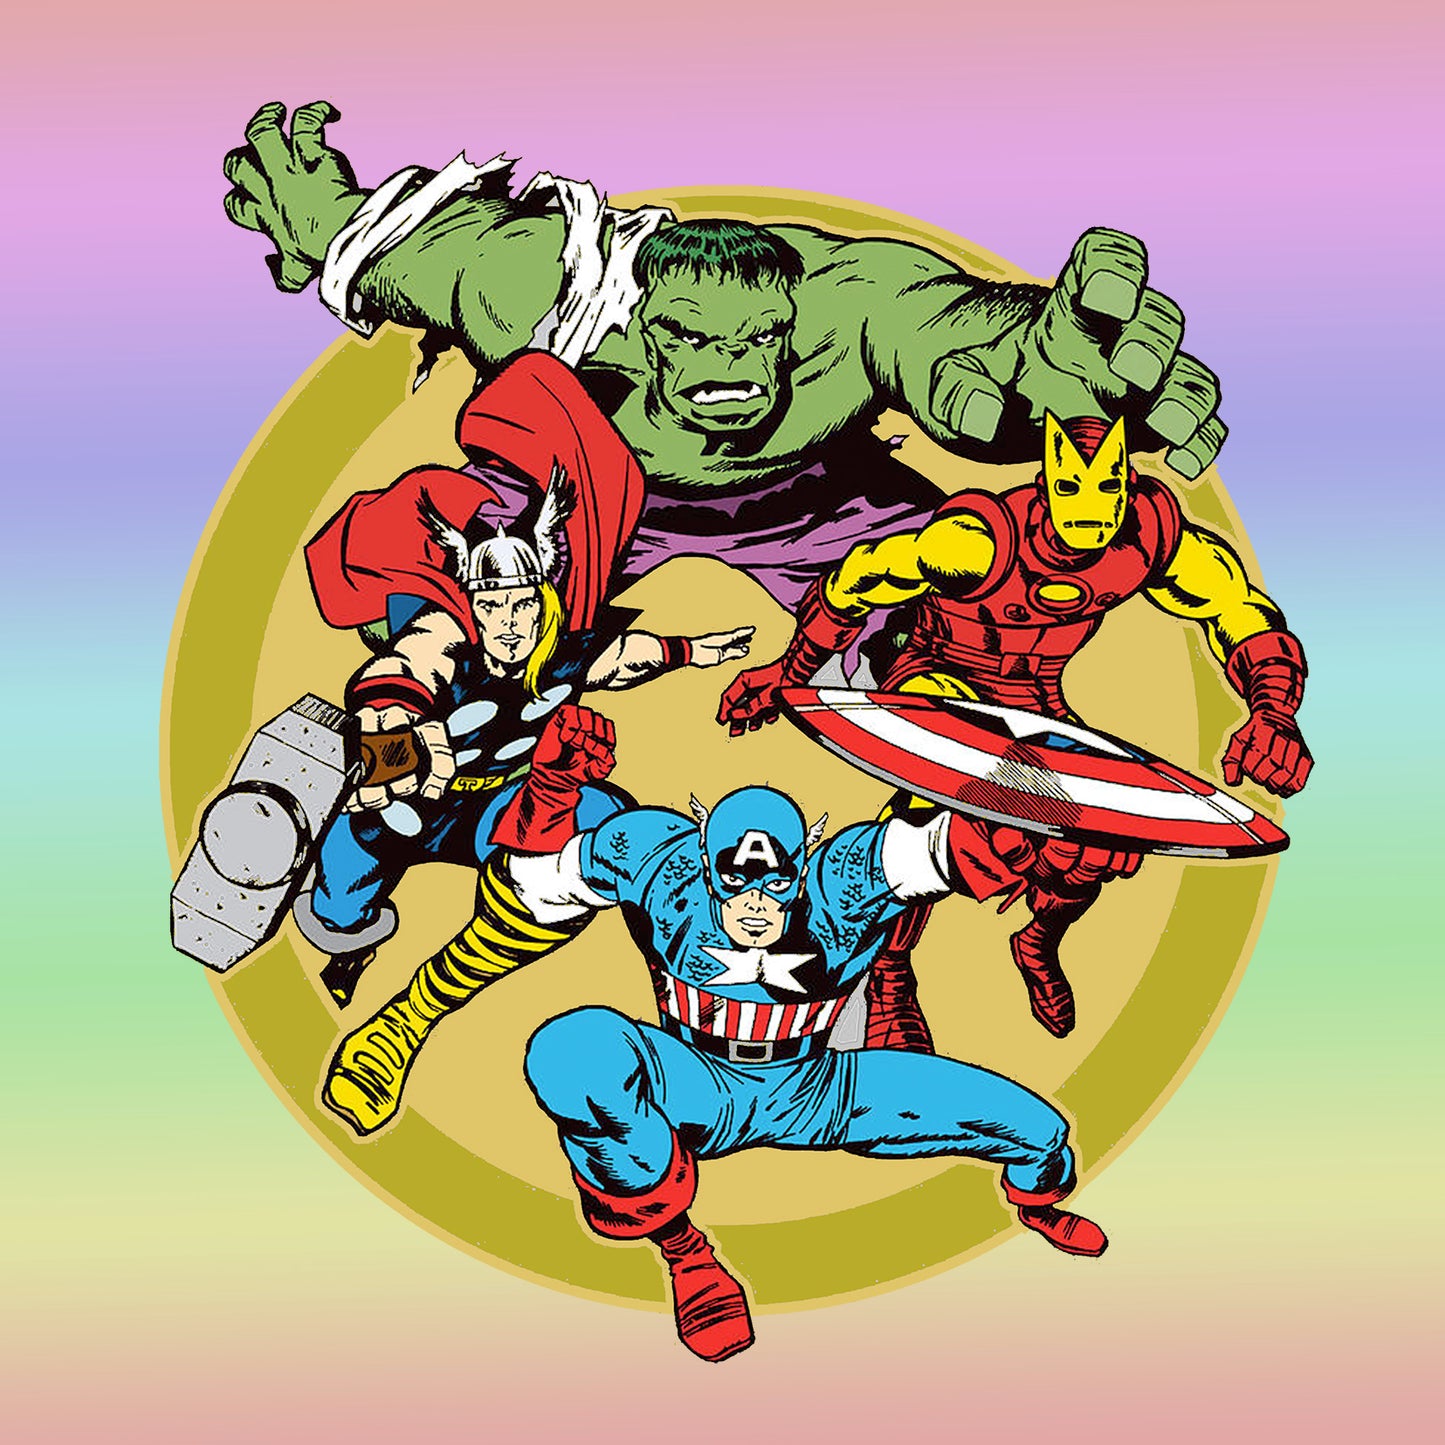 Marvel - Earth's Mightiest Heroes T-Shirt  (various colors)